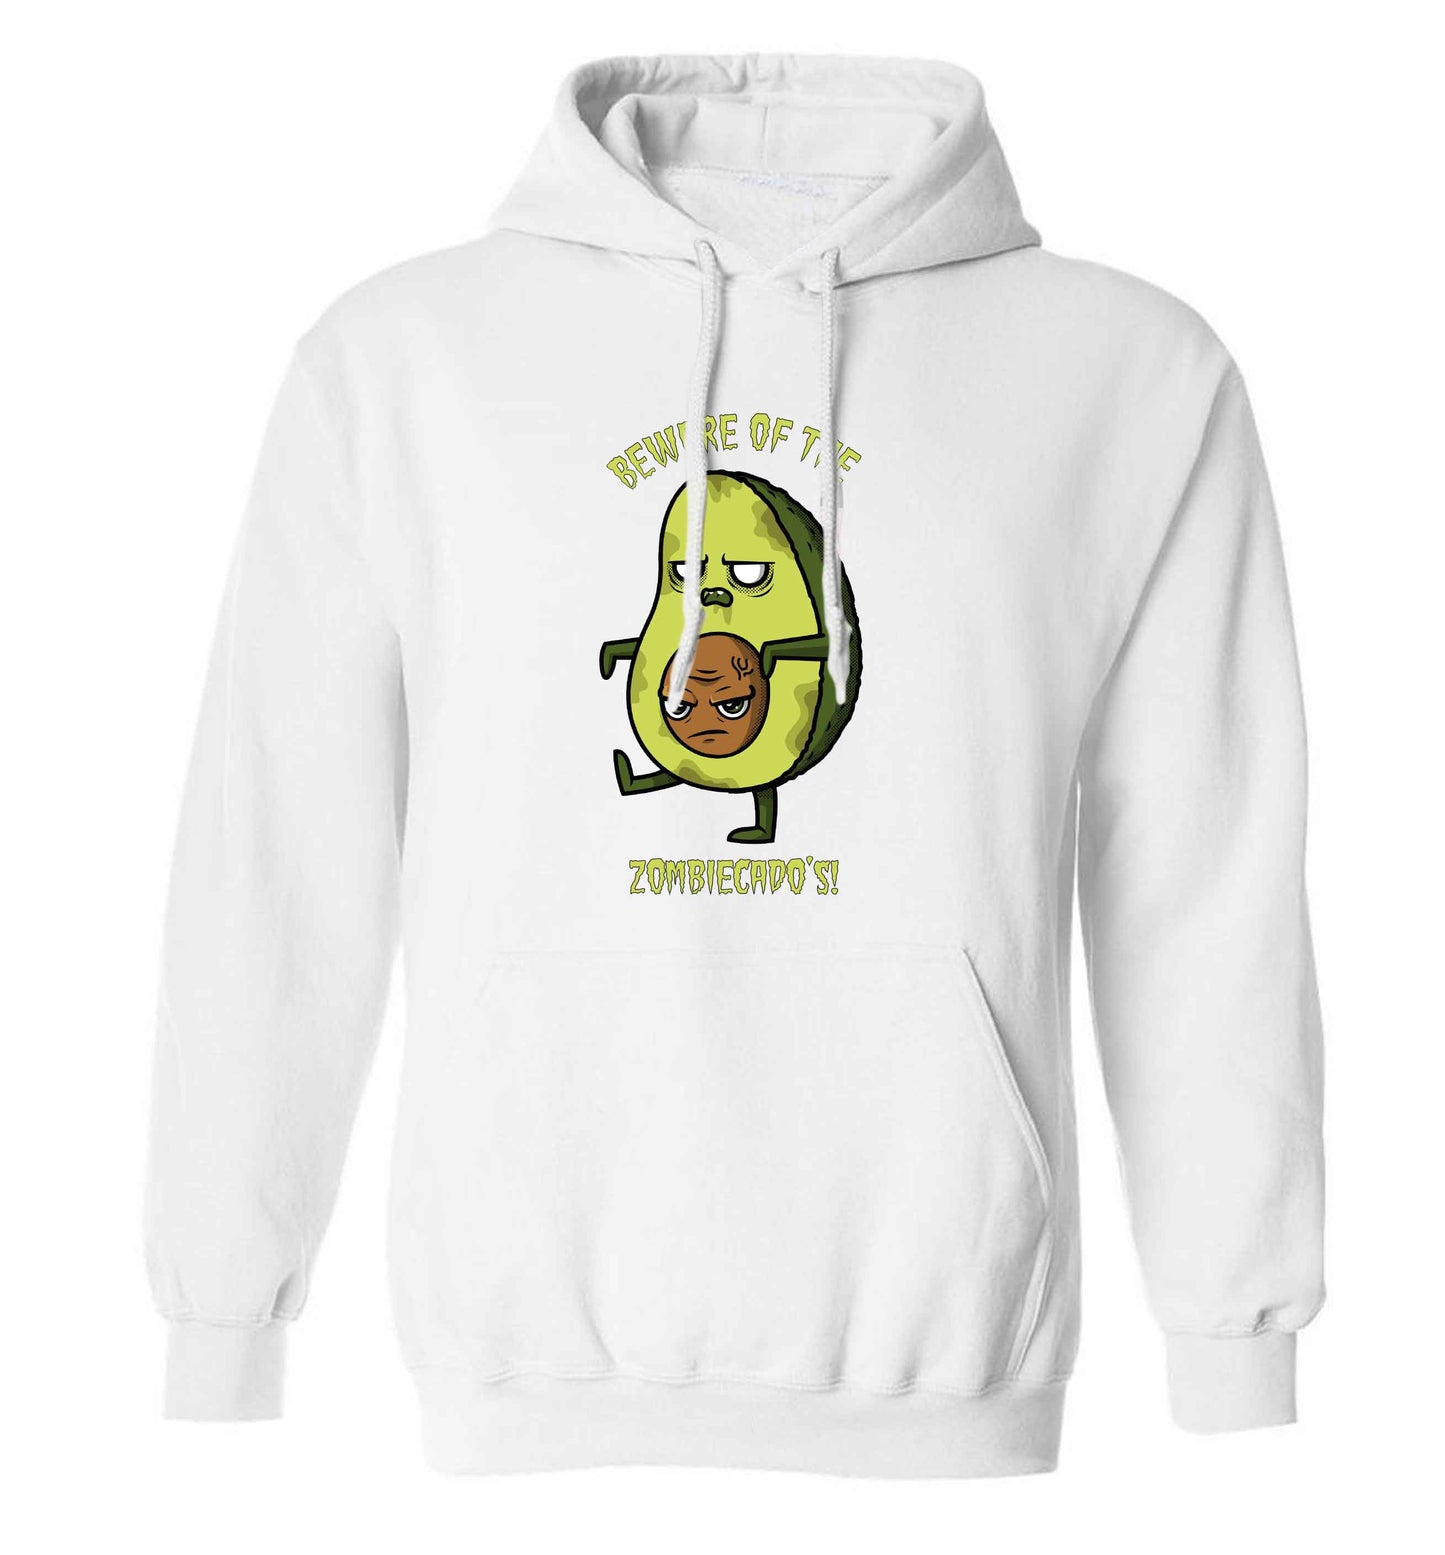 Beware of the zombicado's adults unisex white hoodie 2XL